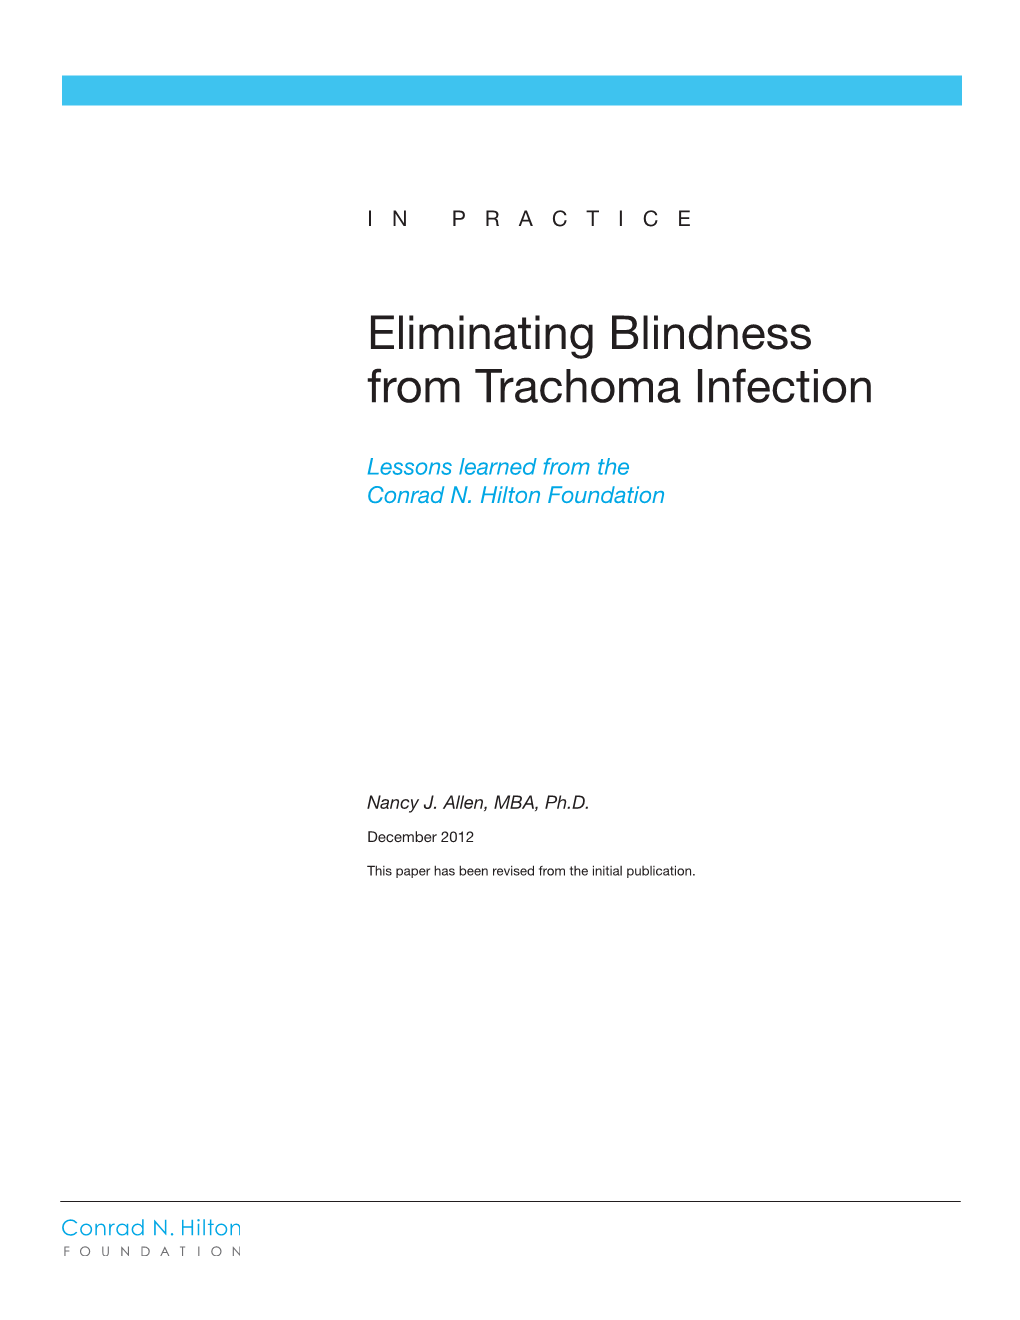 In Practice "Eliminating Blindness from Trachoma Infection"